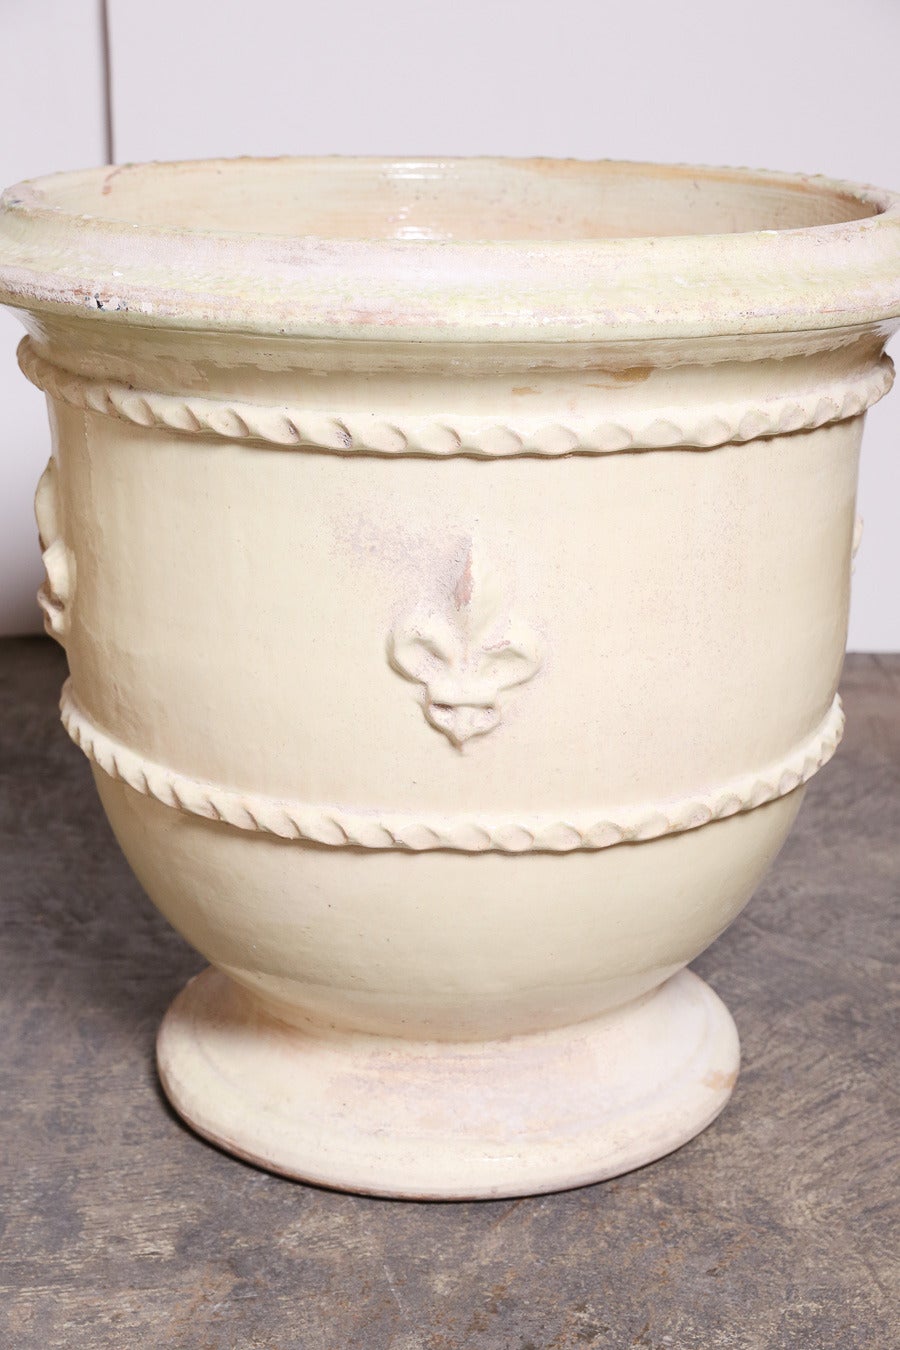 Two large Garden Urns in a light ochre color